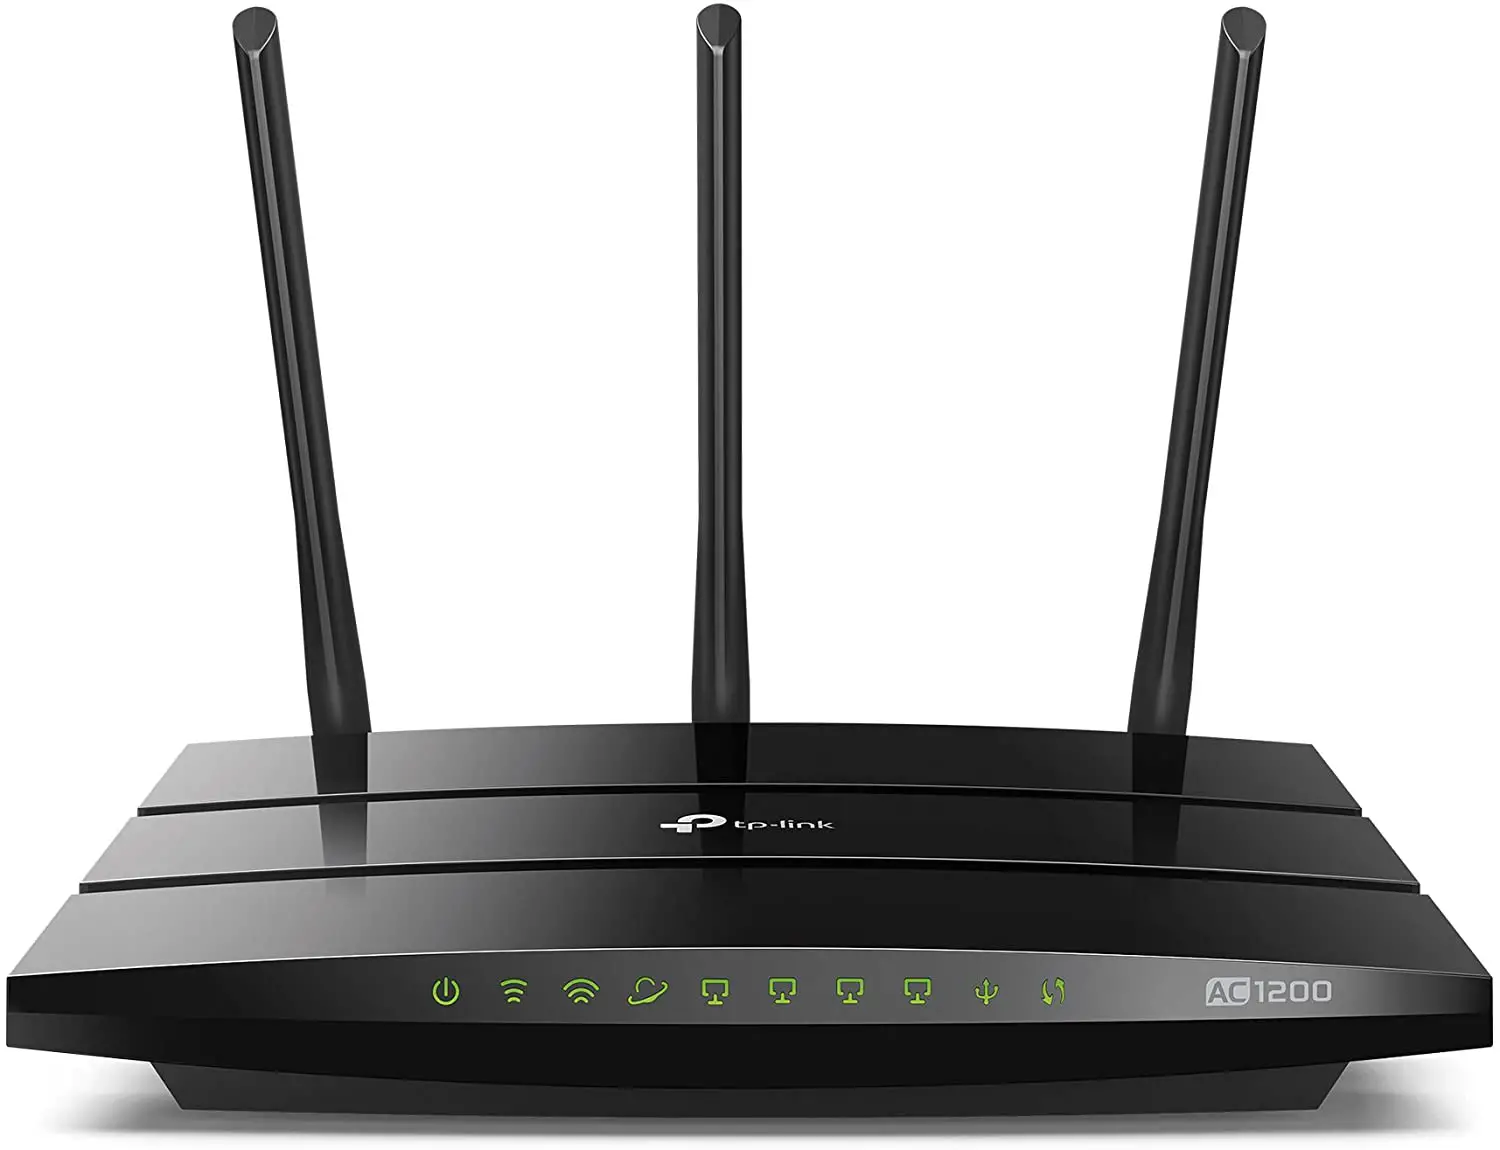 TP-Link's Archer C1200 Wireless Router